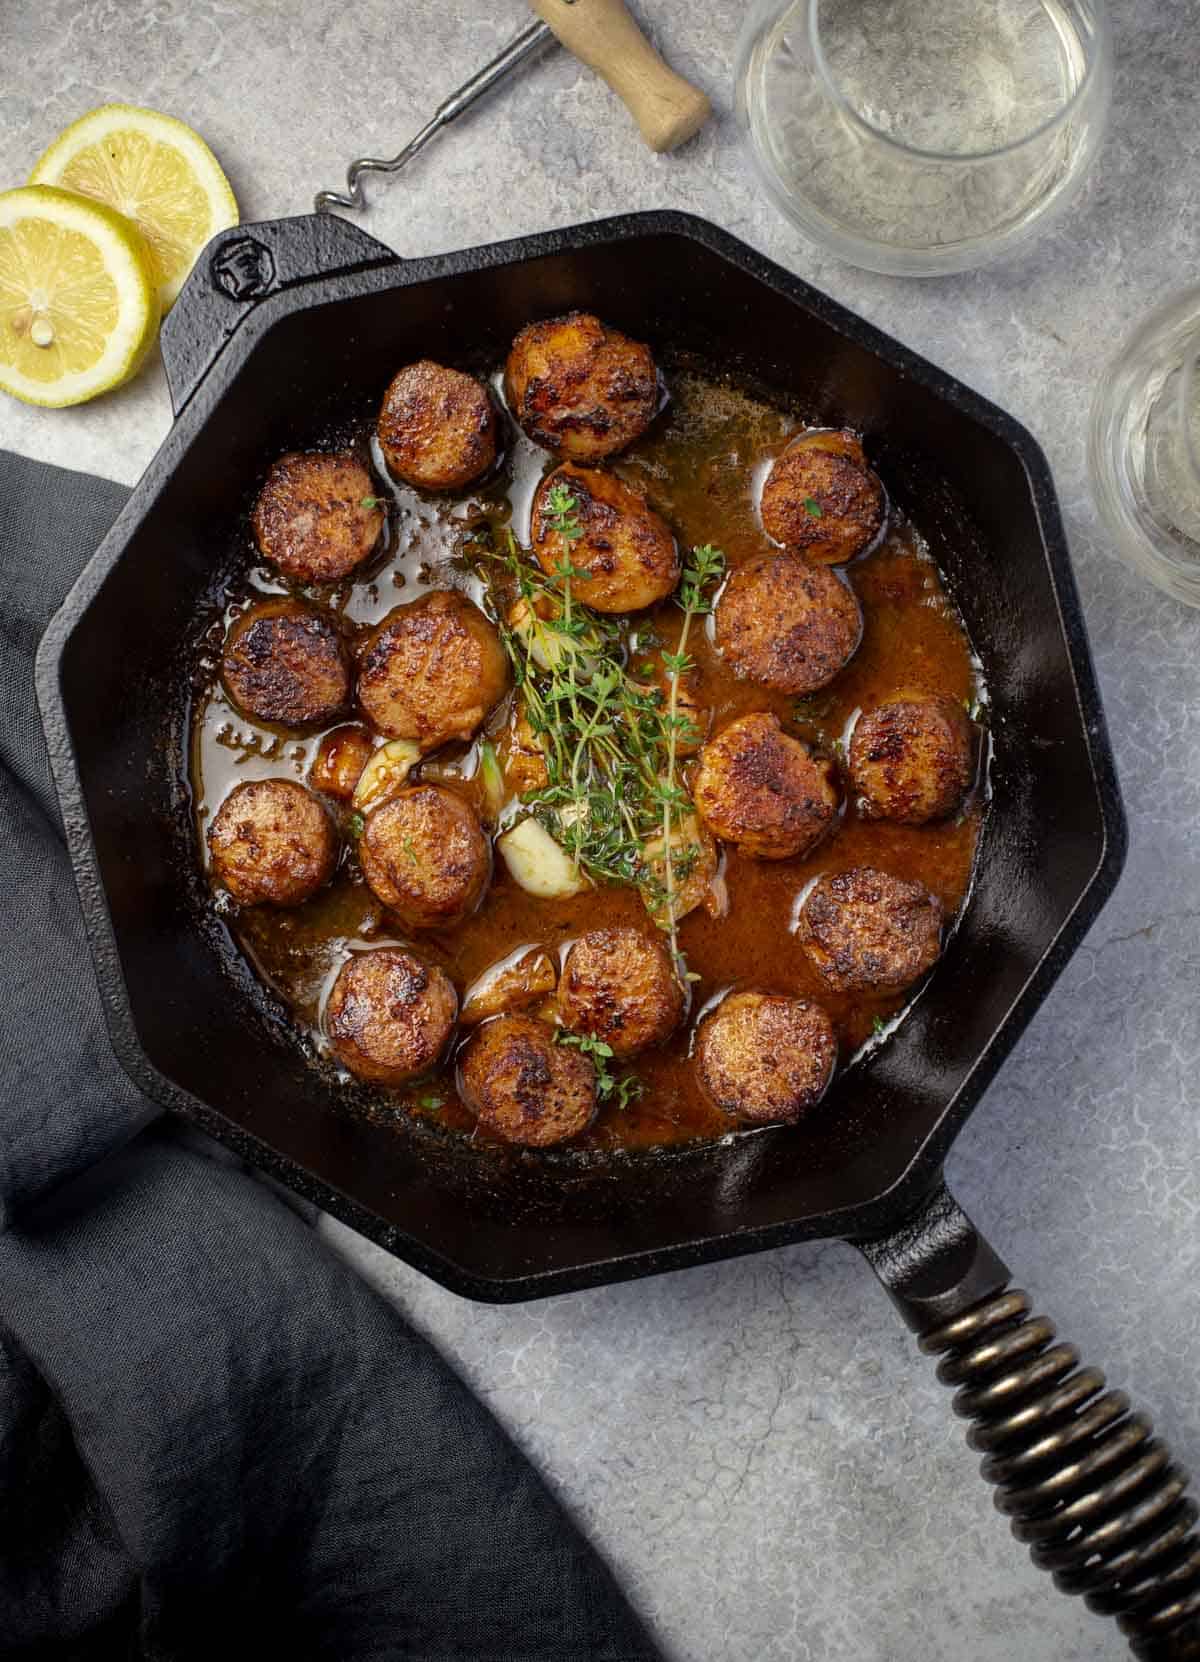 Grilled scallops in a cast iron pan with a white wine butter herb sauce